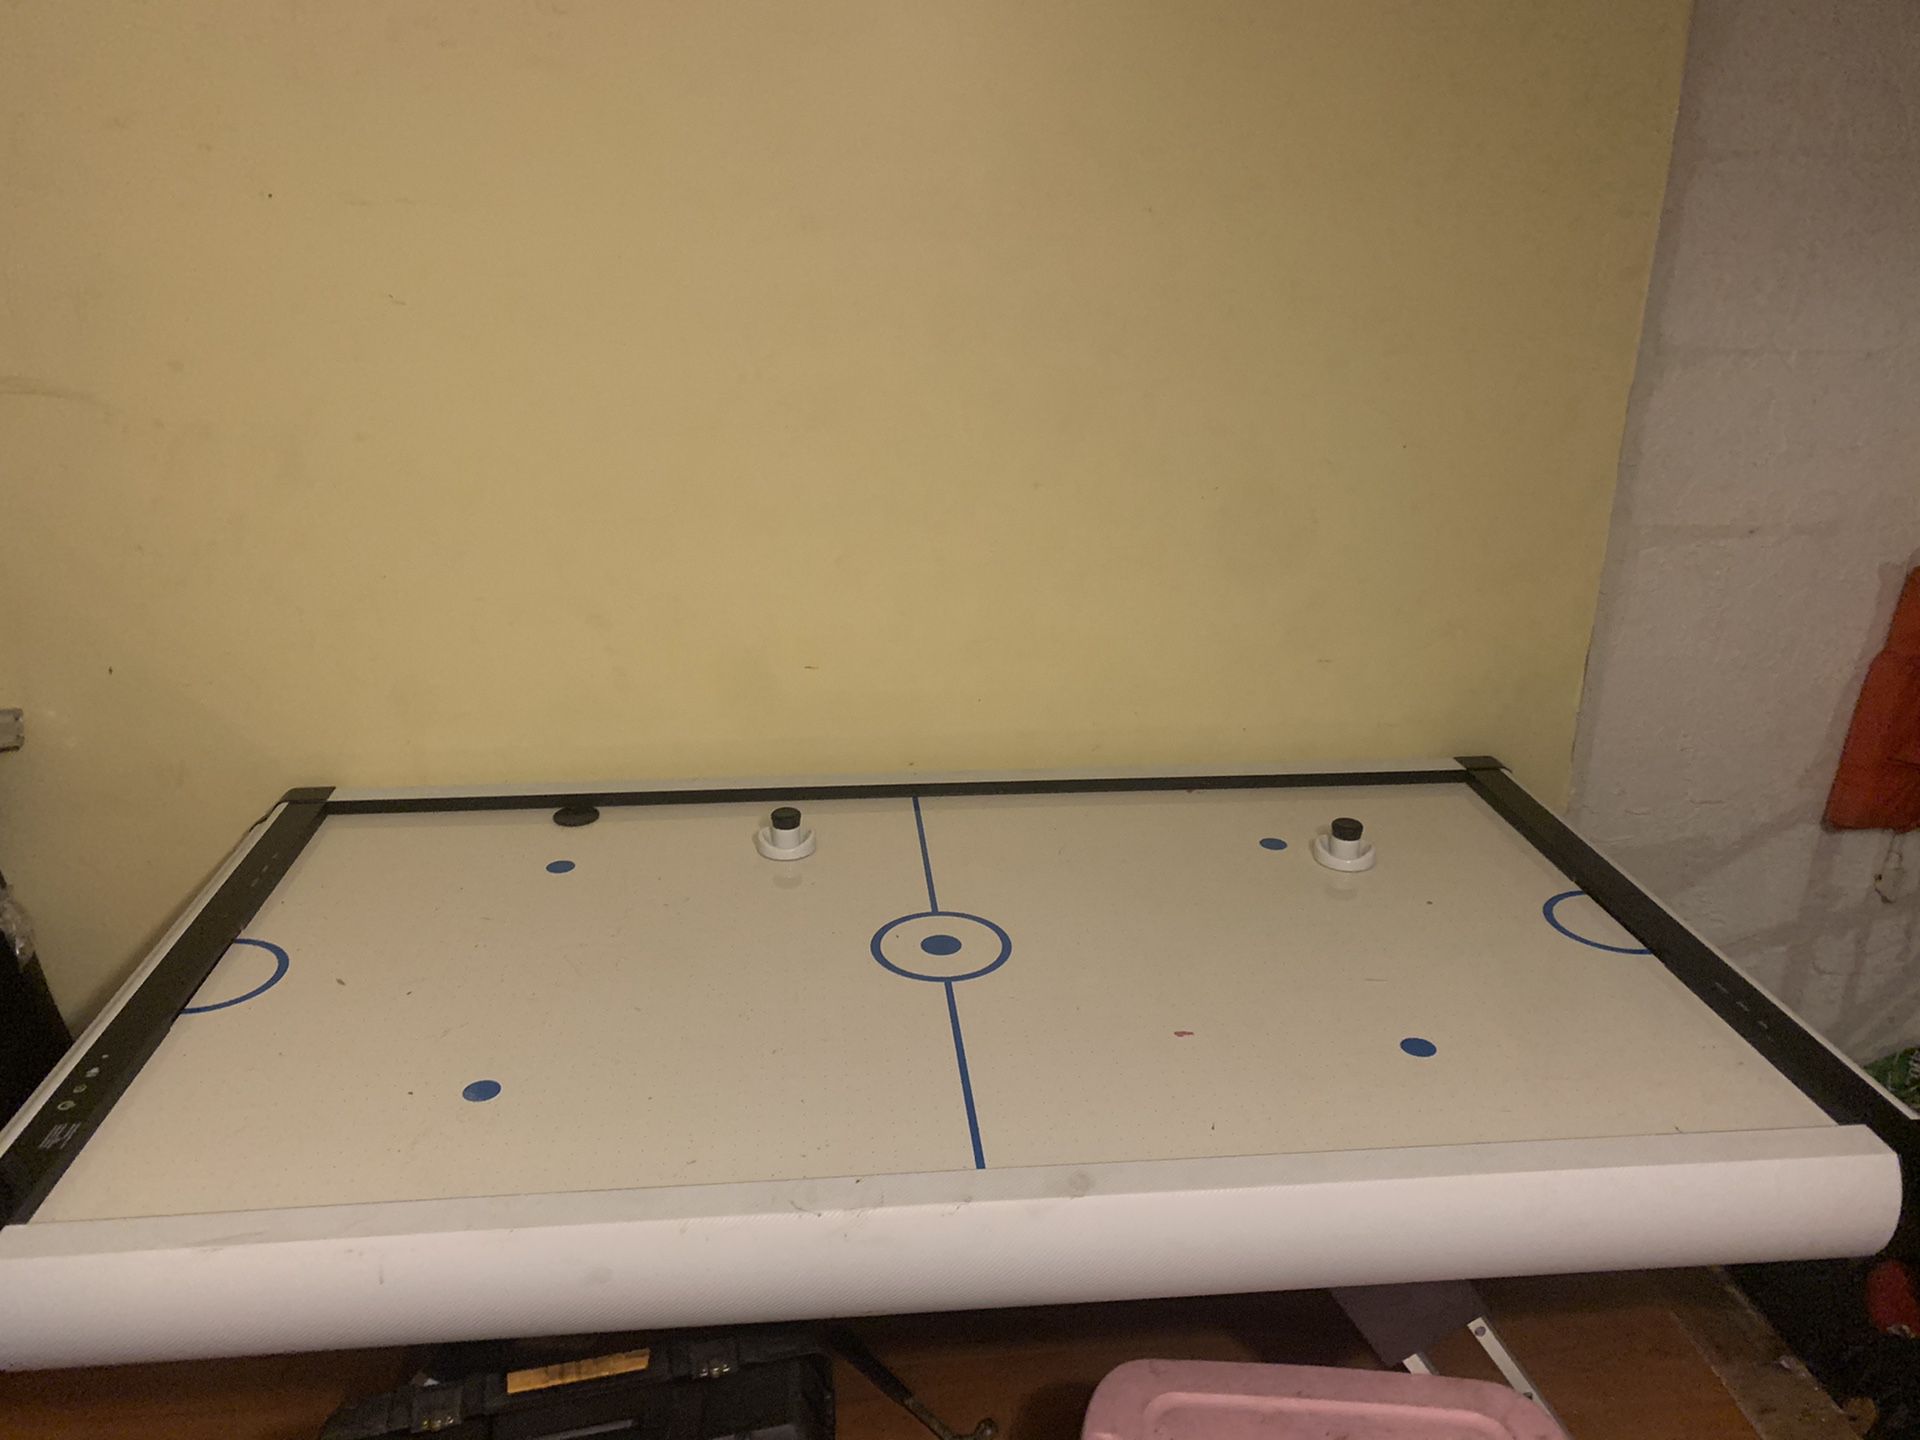 Professional grade air hockey table, Indoors and barely used.